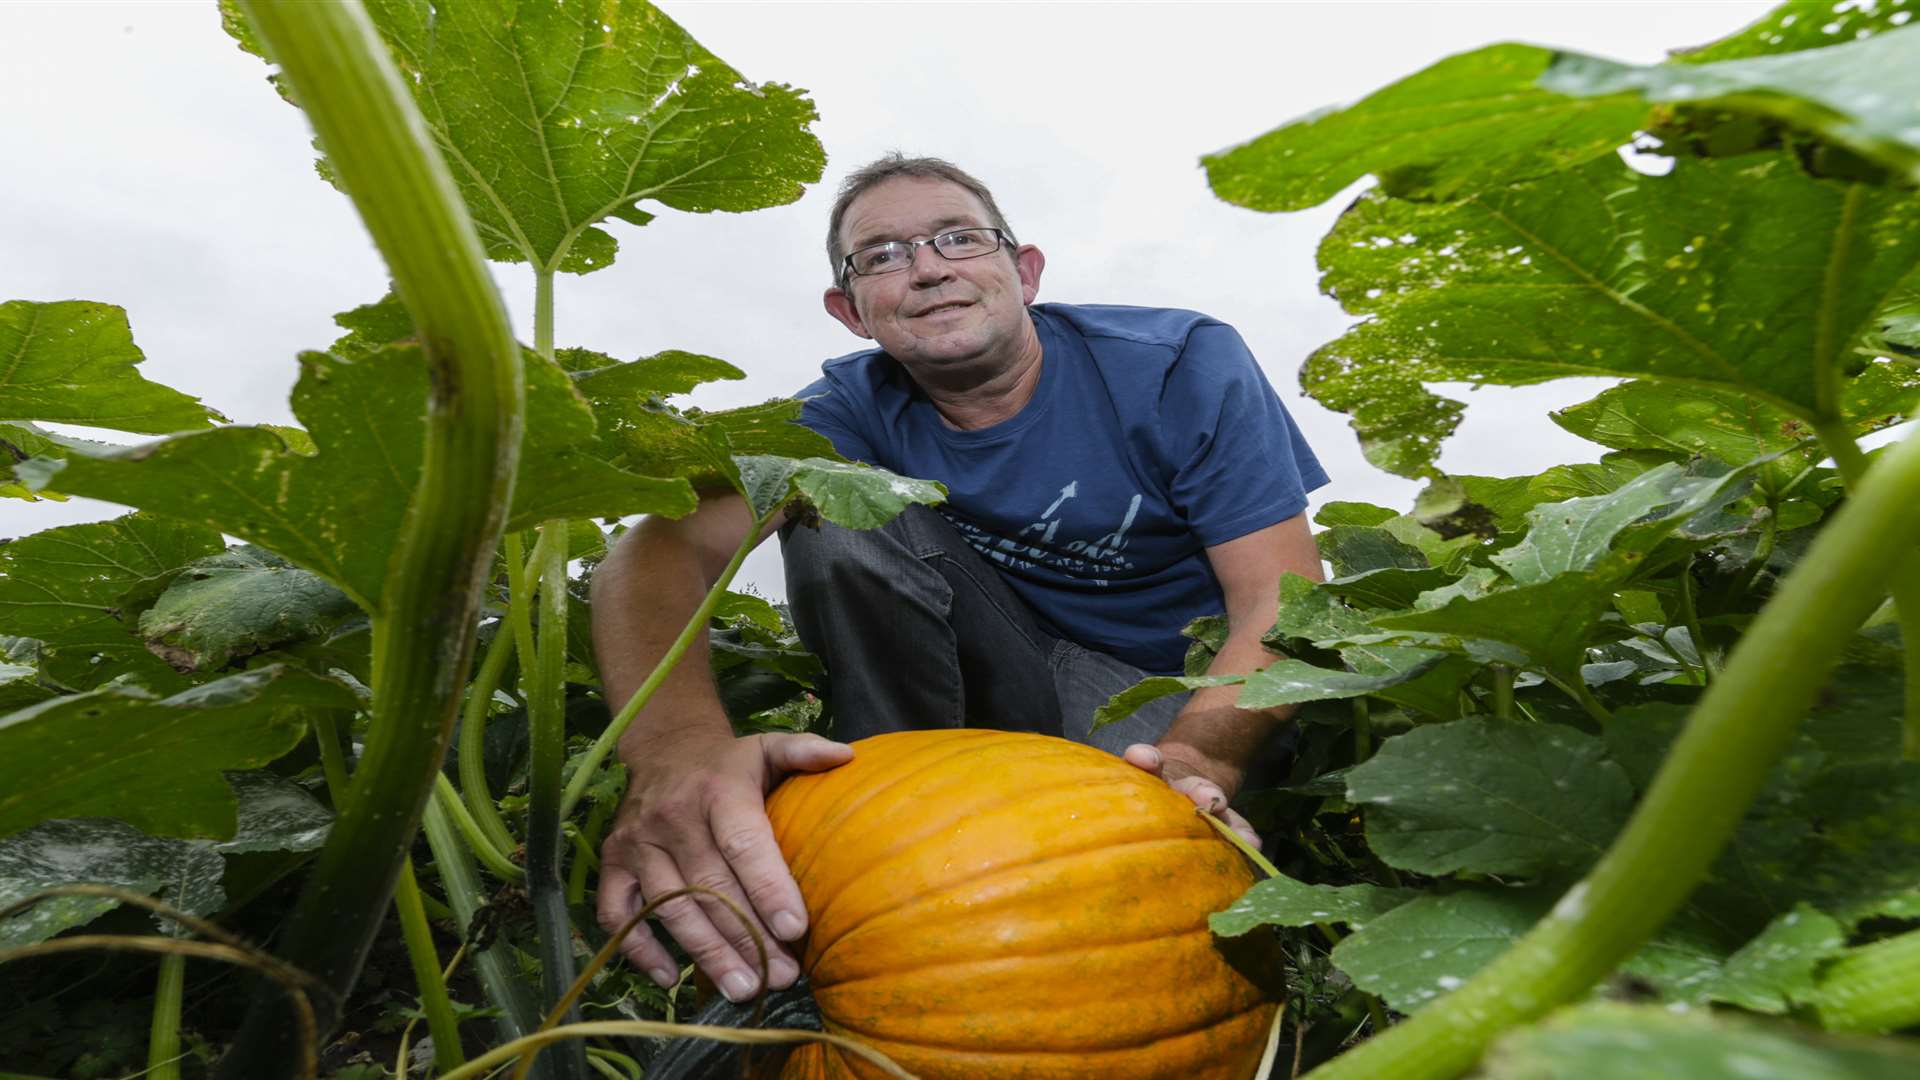 Farmer Charlie Eckley with one of his pumpkins at his new venture Pumpkin Moon in Boxley